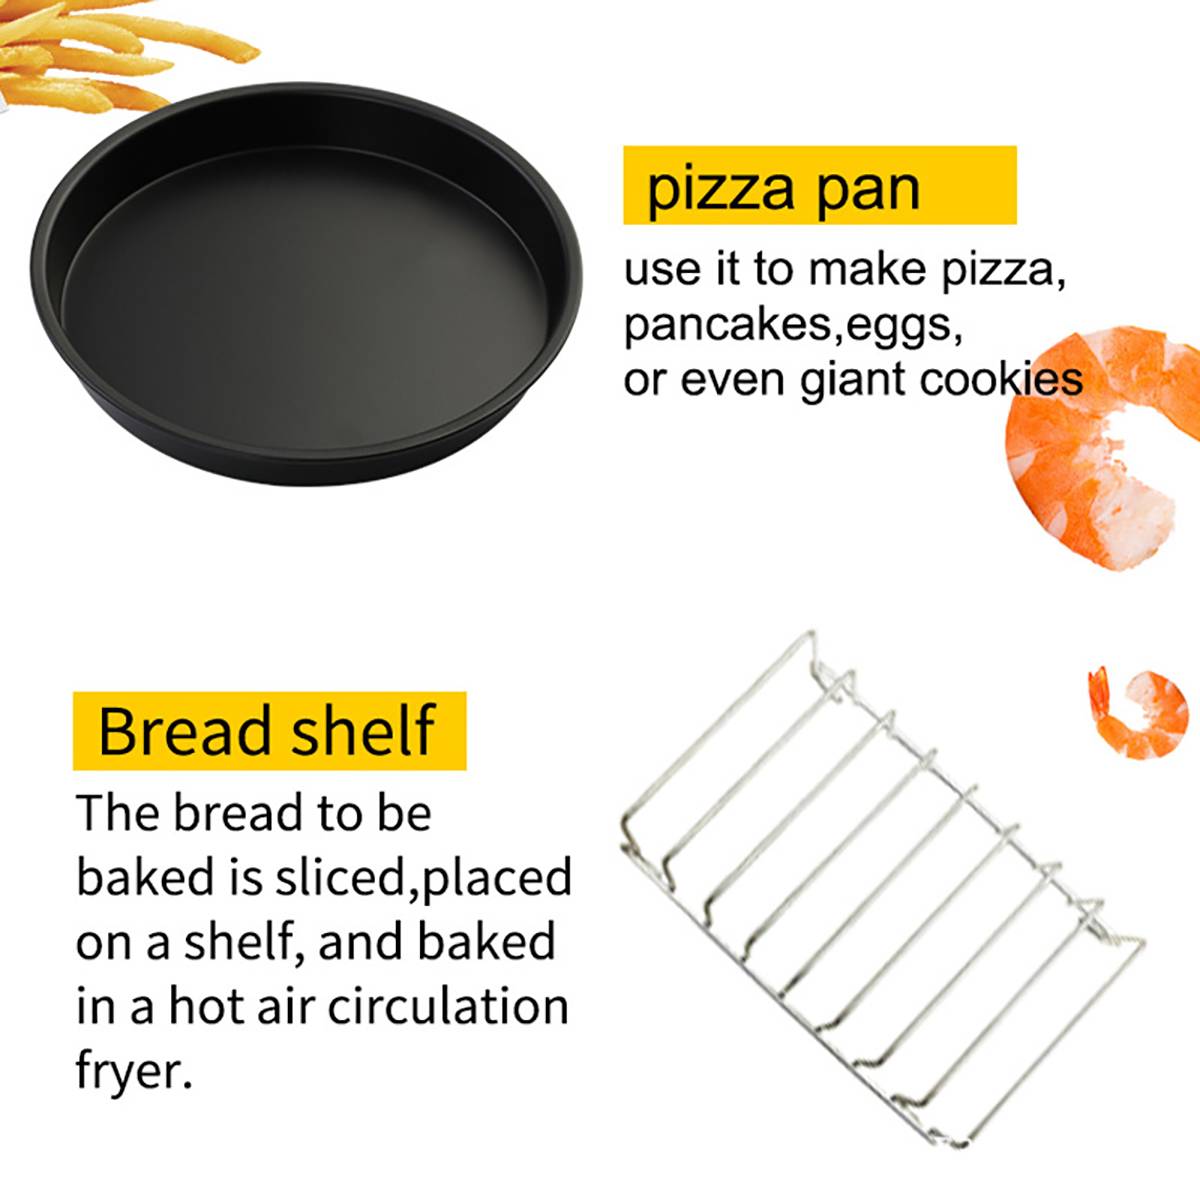 12Pcs Air Fryer Accessories 9 Inch for Philips Air fryer 3.2~6.8QT Baking Basket Pizza Plate Grill Pot Kitchen Cooking Tools